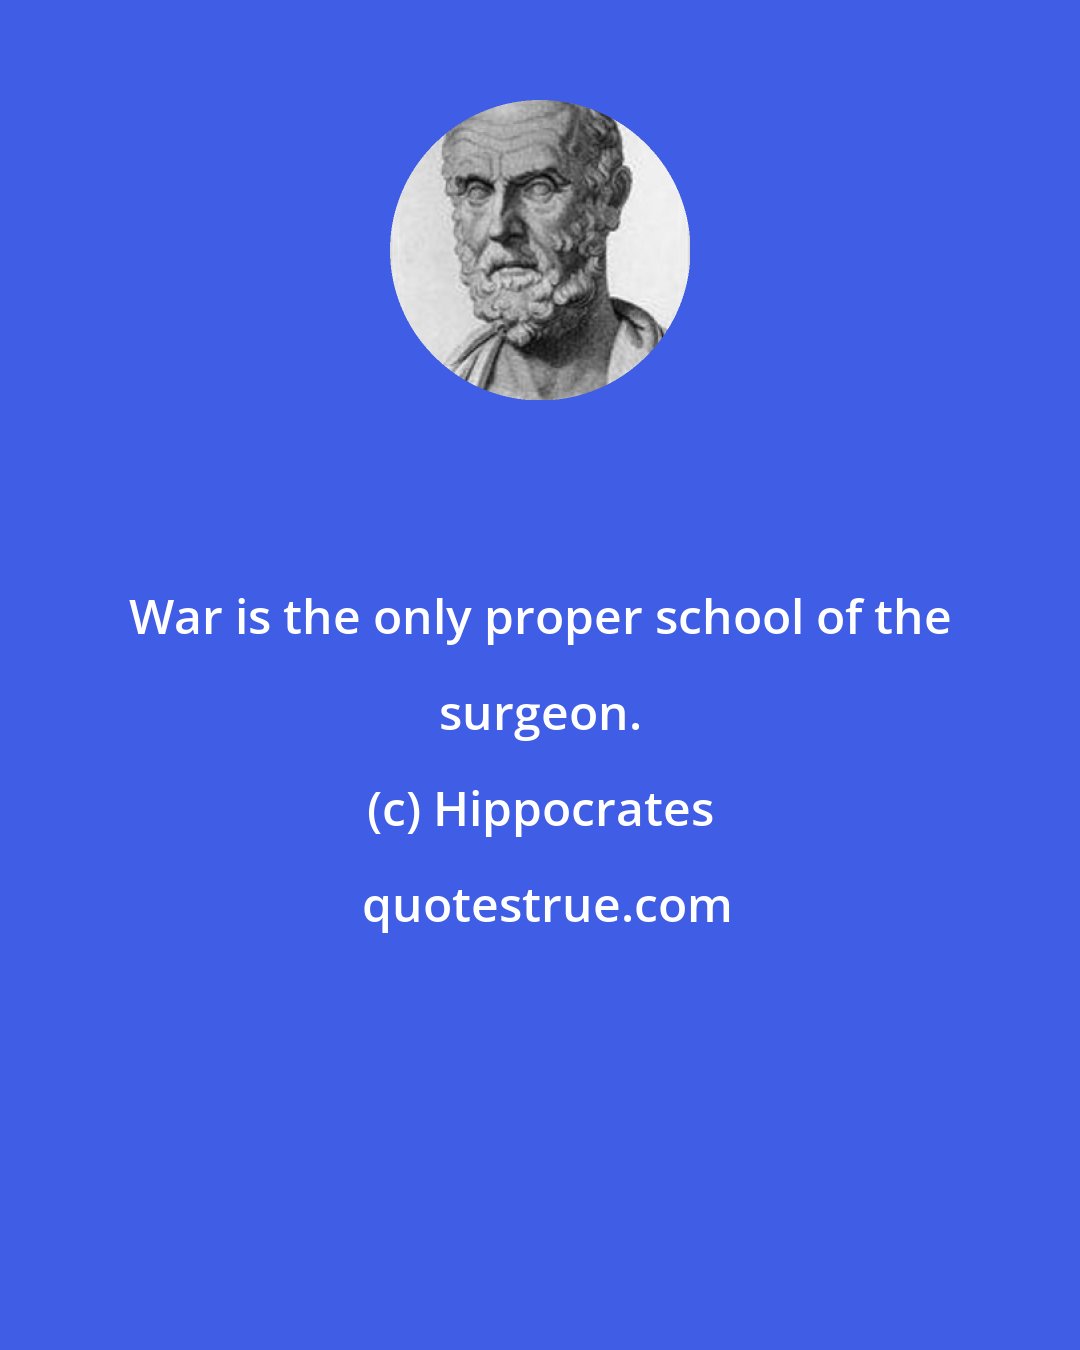 Hippocrates: War is the only proper school of the surgeon.